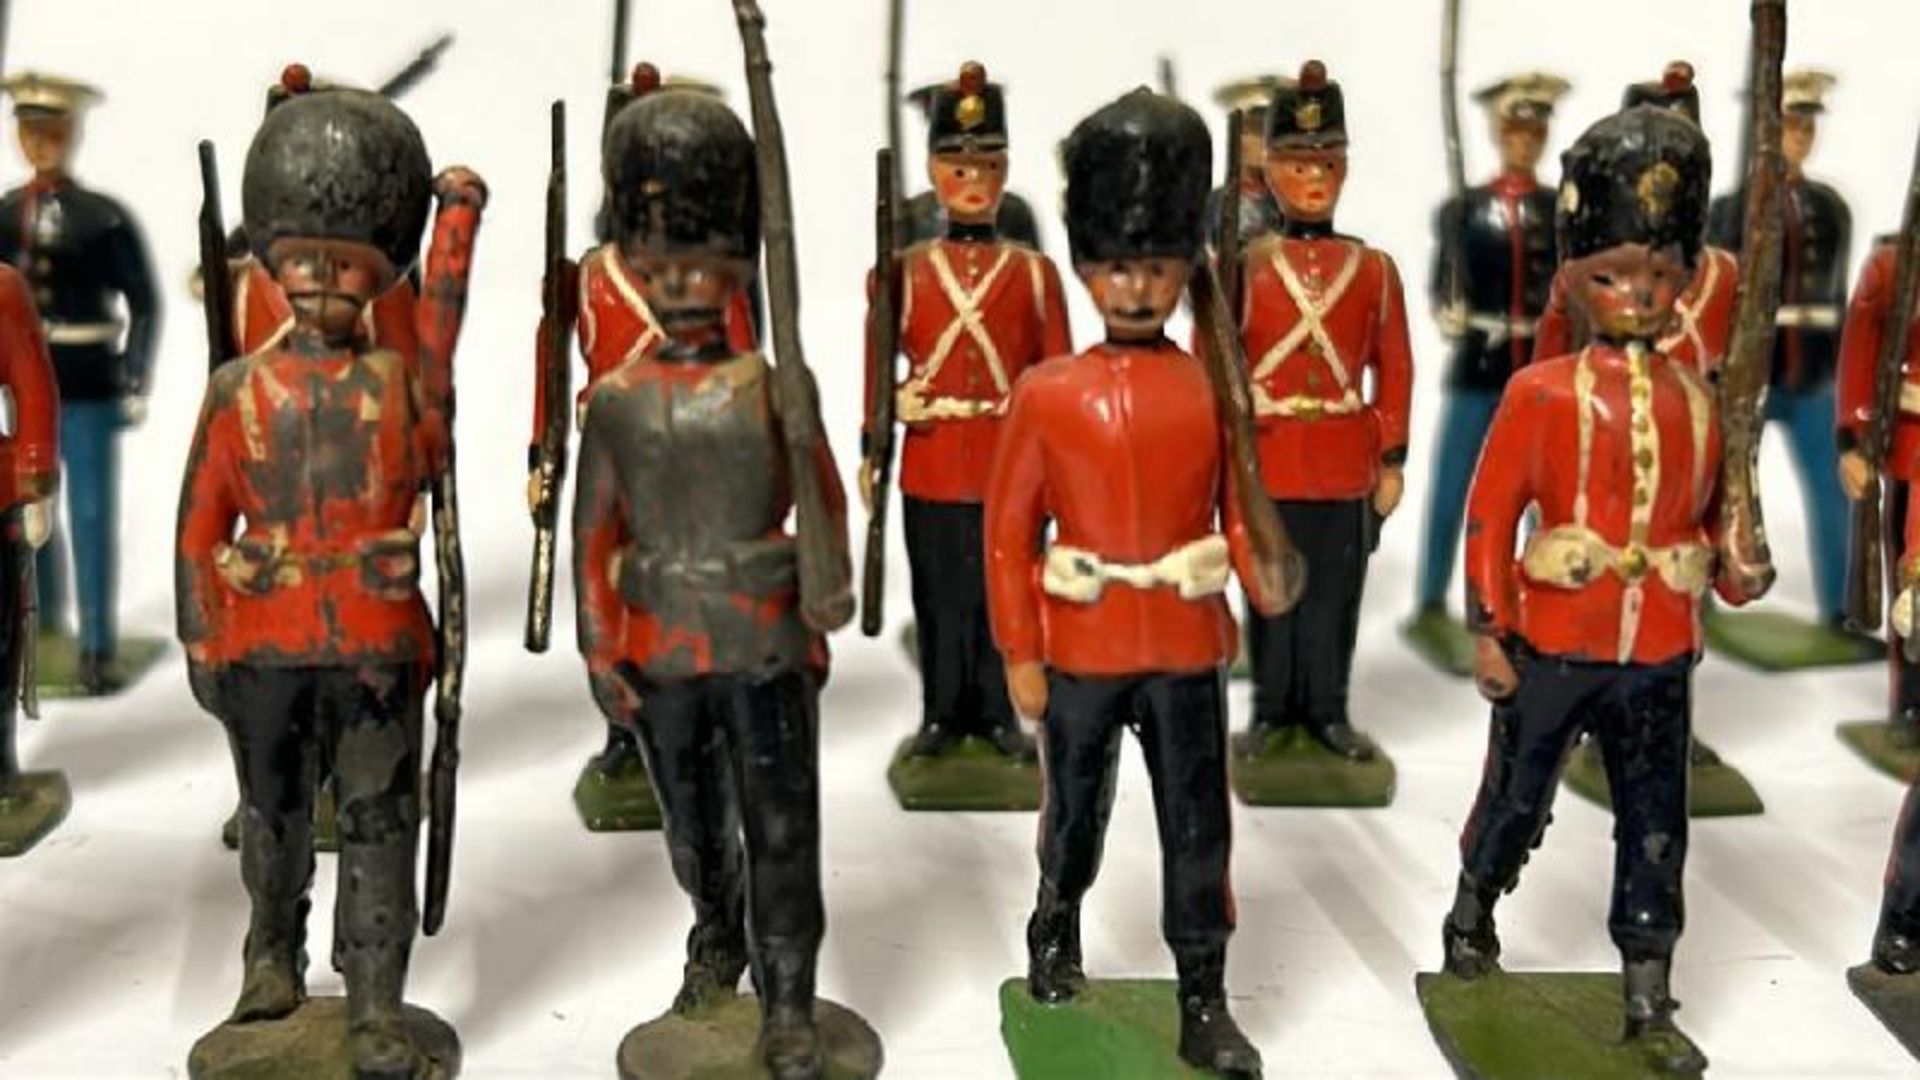 Assorted Britains lead soldiers including Grenadier guards, U.S. Marines and Foot Infantry - Image 7 of 14